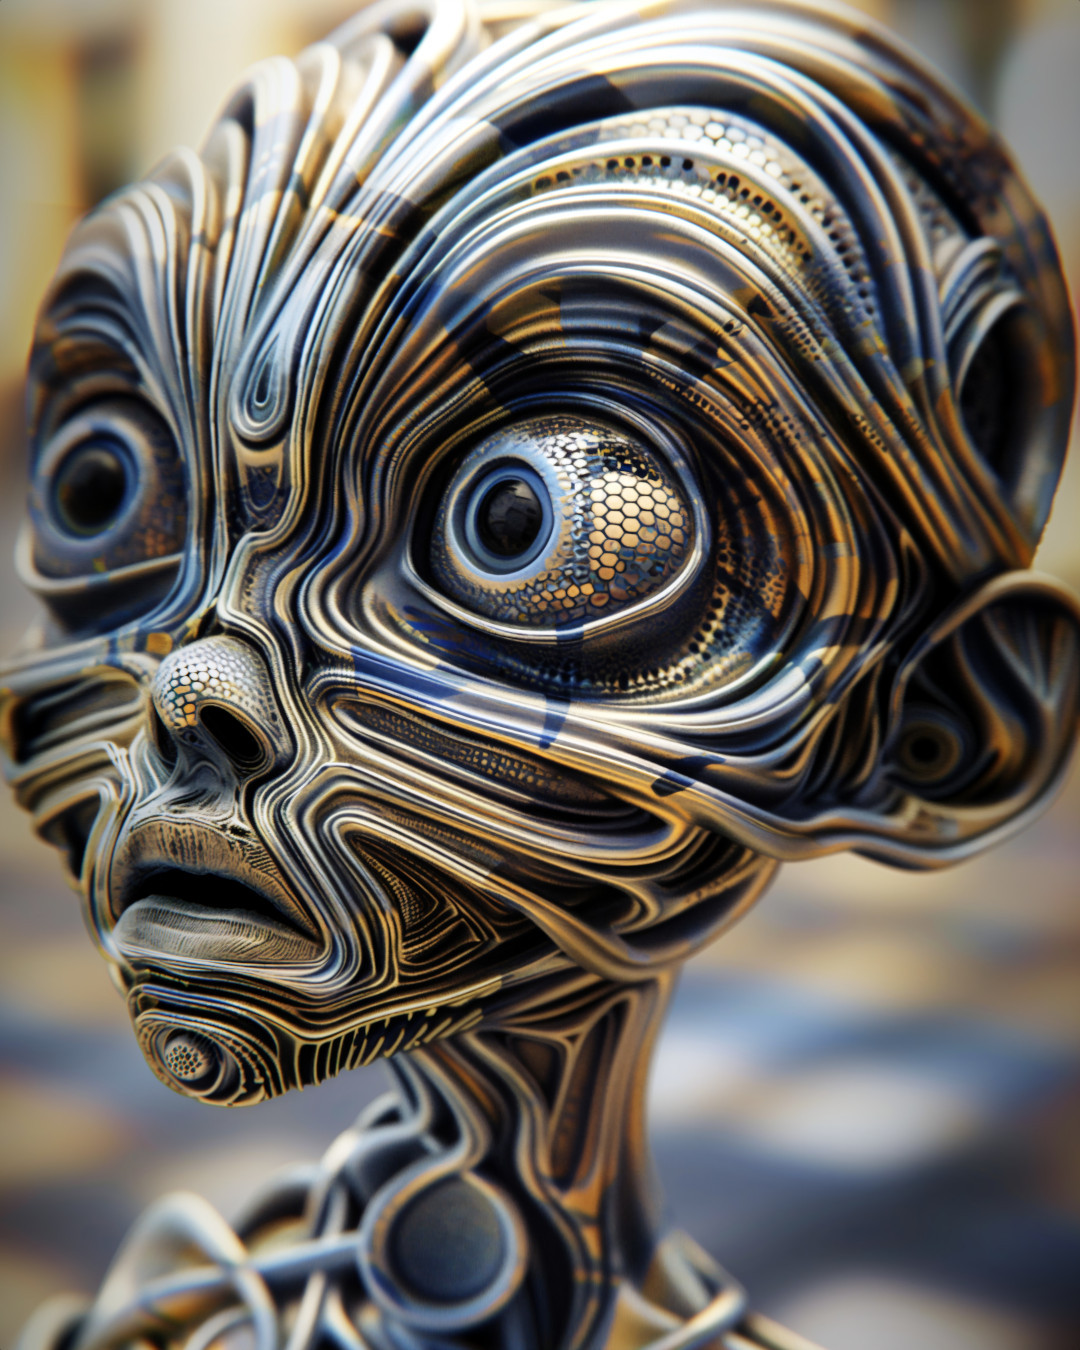 Creature's head, organic patterns, made of shiny metal